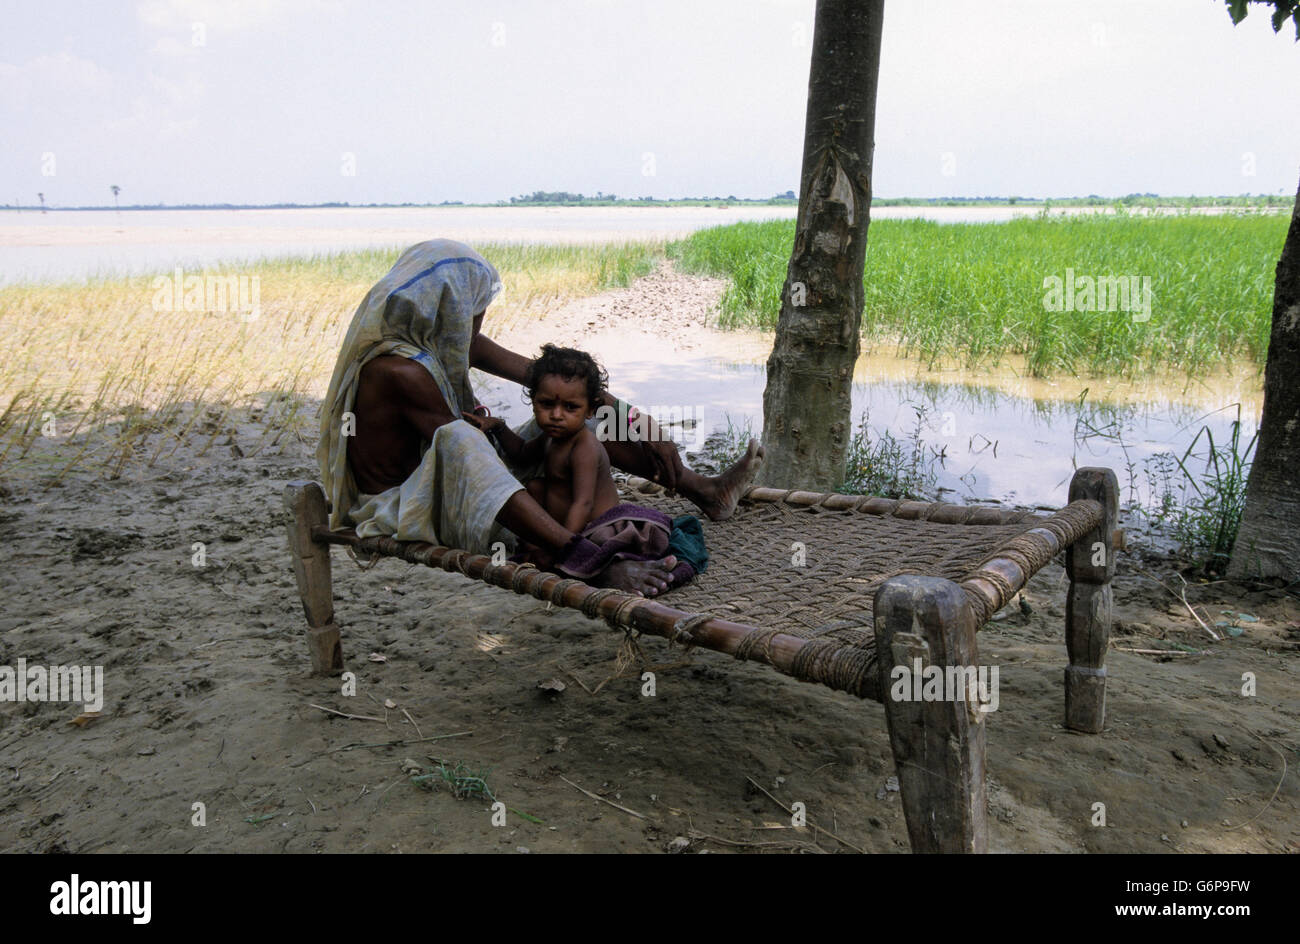 India Bihar , submergence at Bagmati river a branch of ganges due to heavy monsoon rains and melting Himalaya glaciers, mother with child on charpoy, traditional bed, destroyed paddy fields Stock Photo